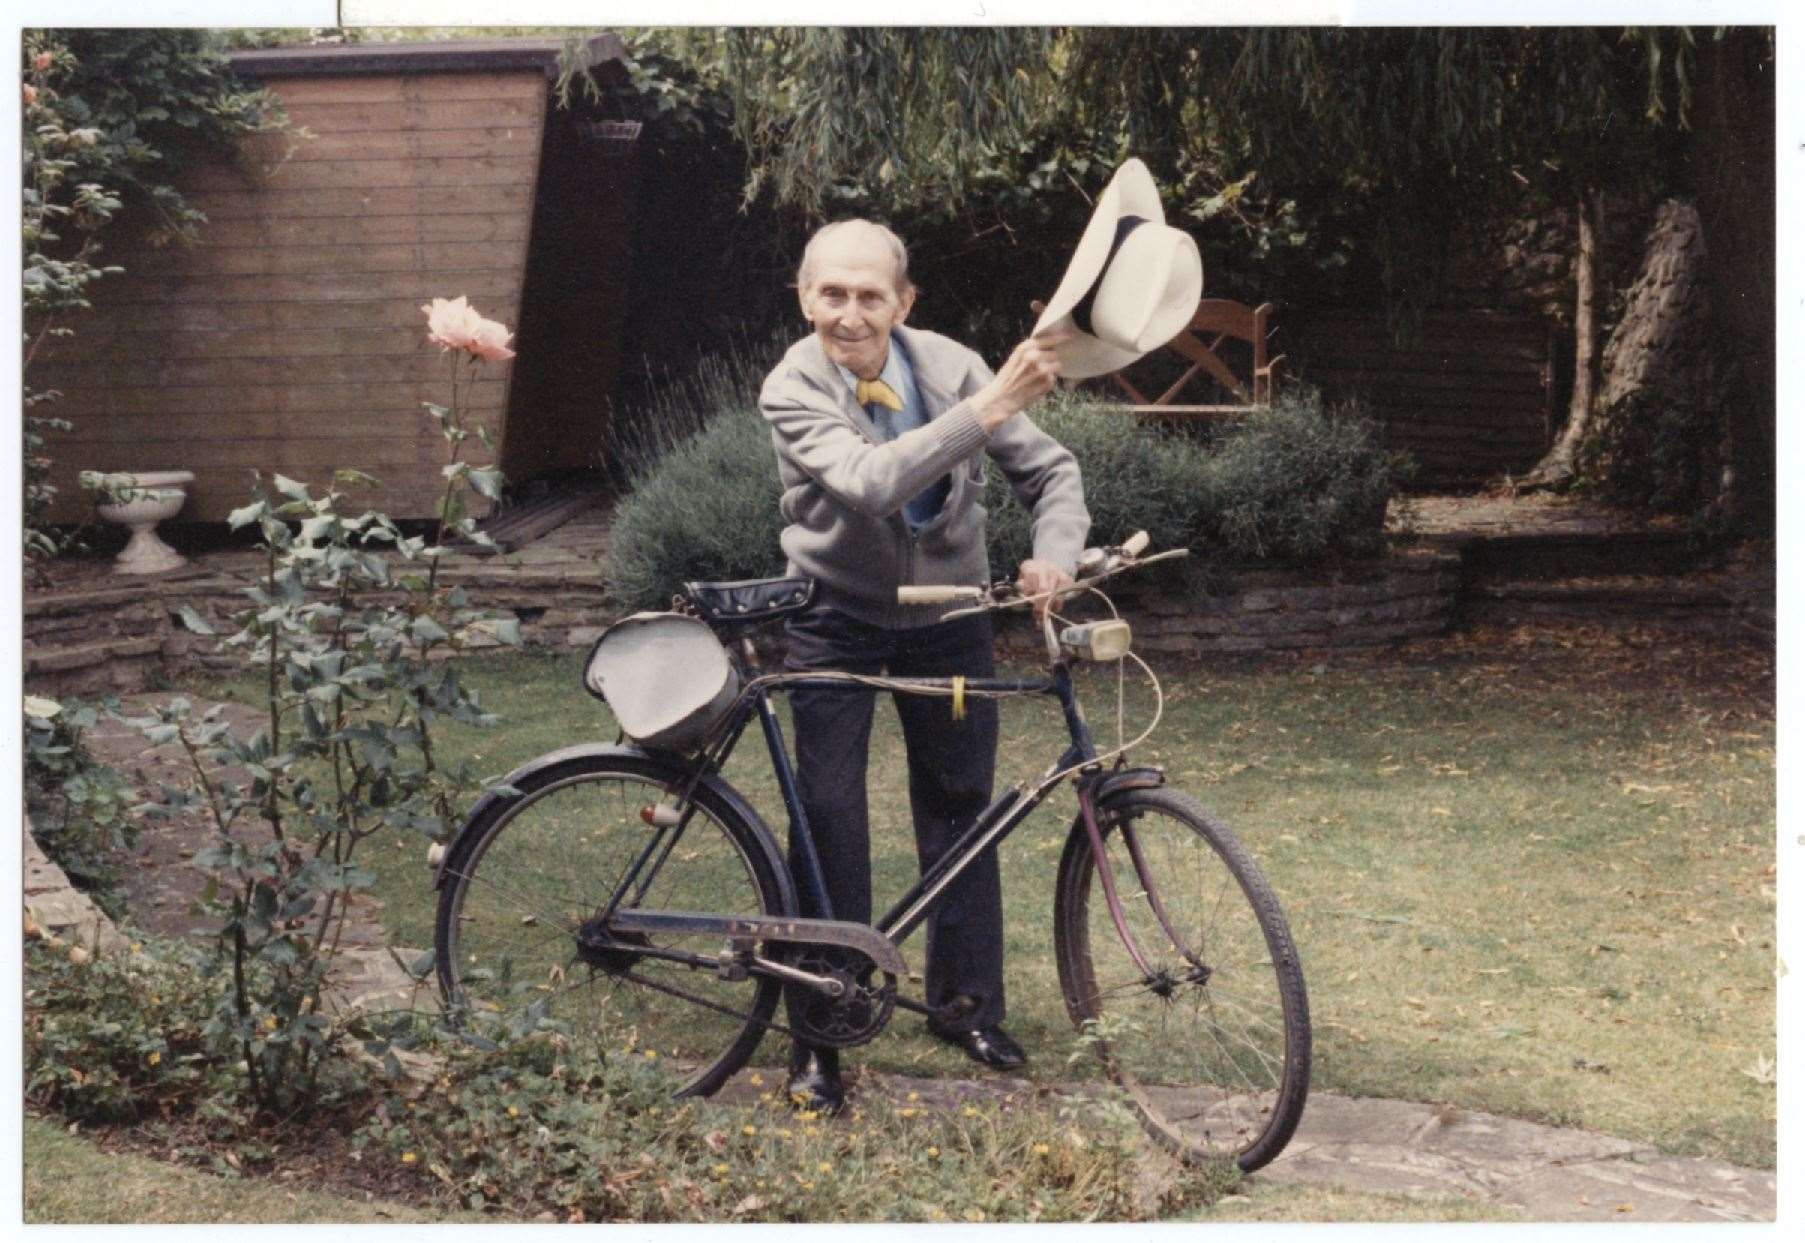 Star Wars actor Peter Cushing in his garden with his bike. Picture: Whitstable Museum